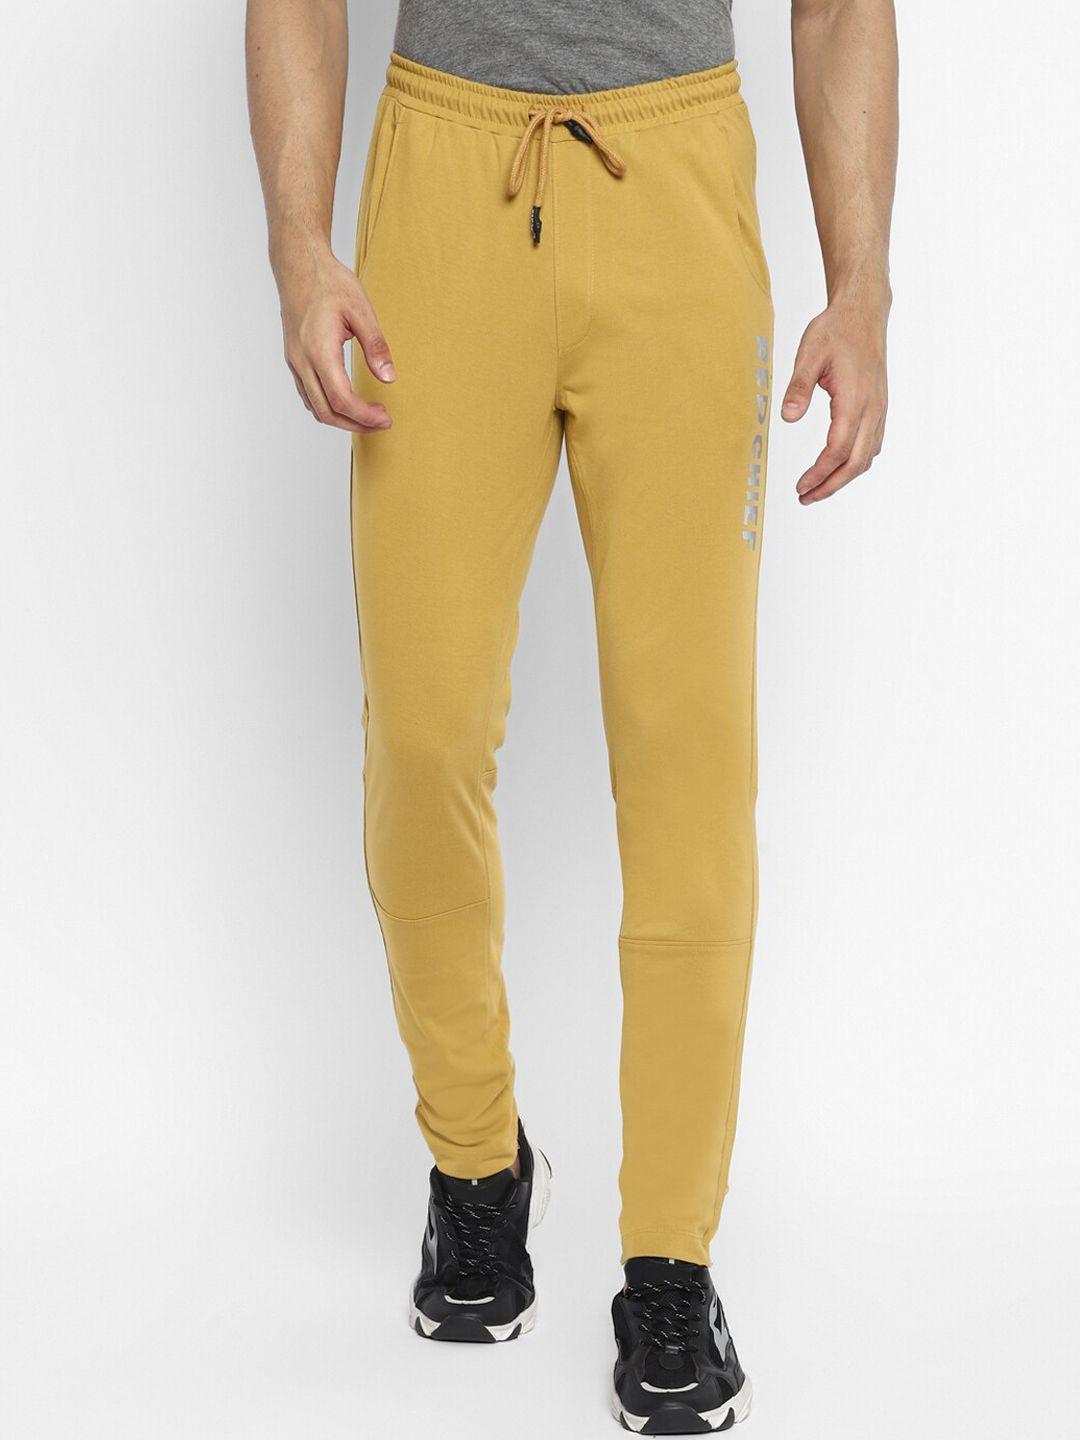 red-chief-men-yellow-solid-slim-fit-track-pants